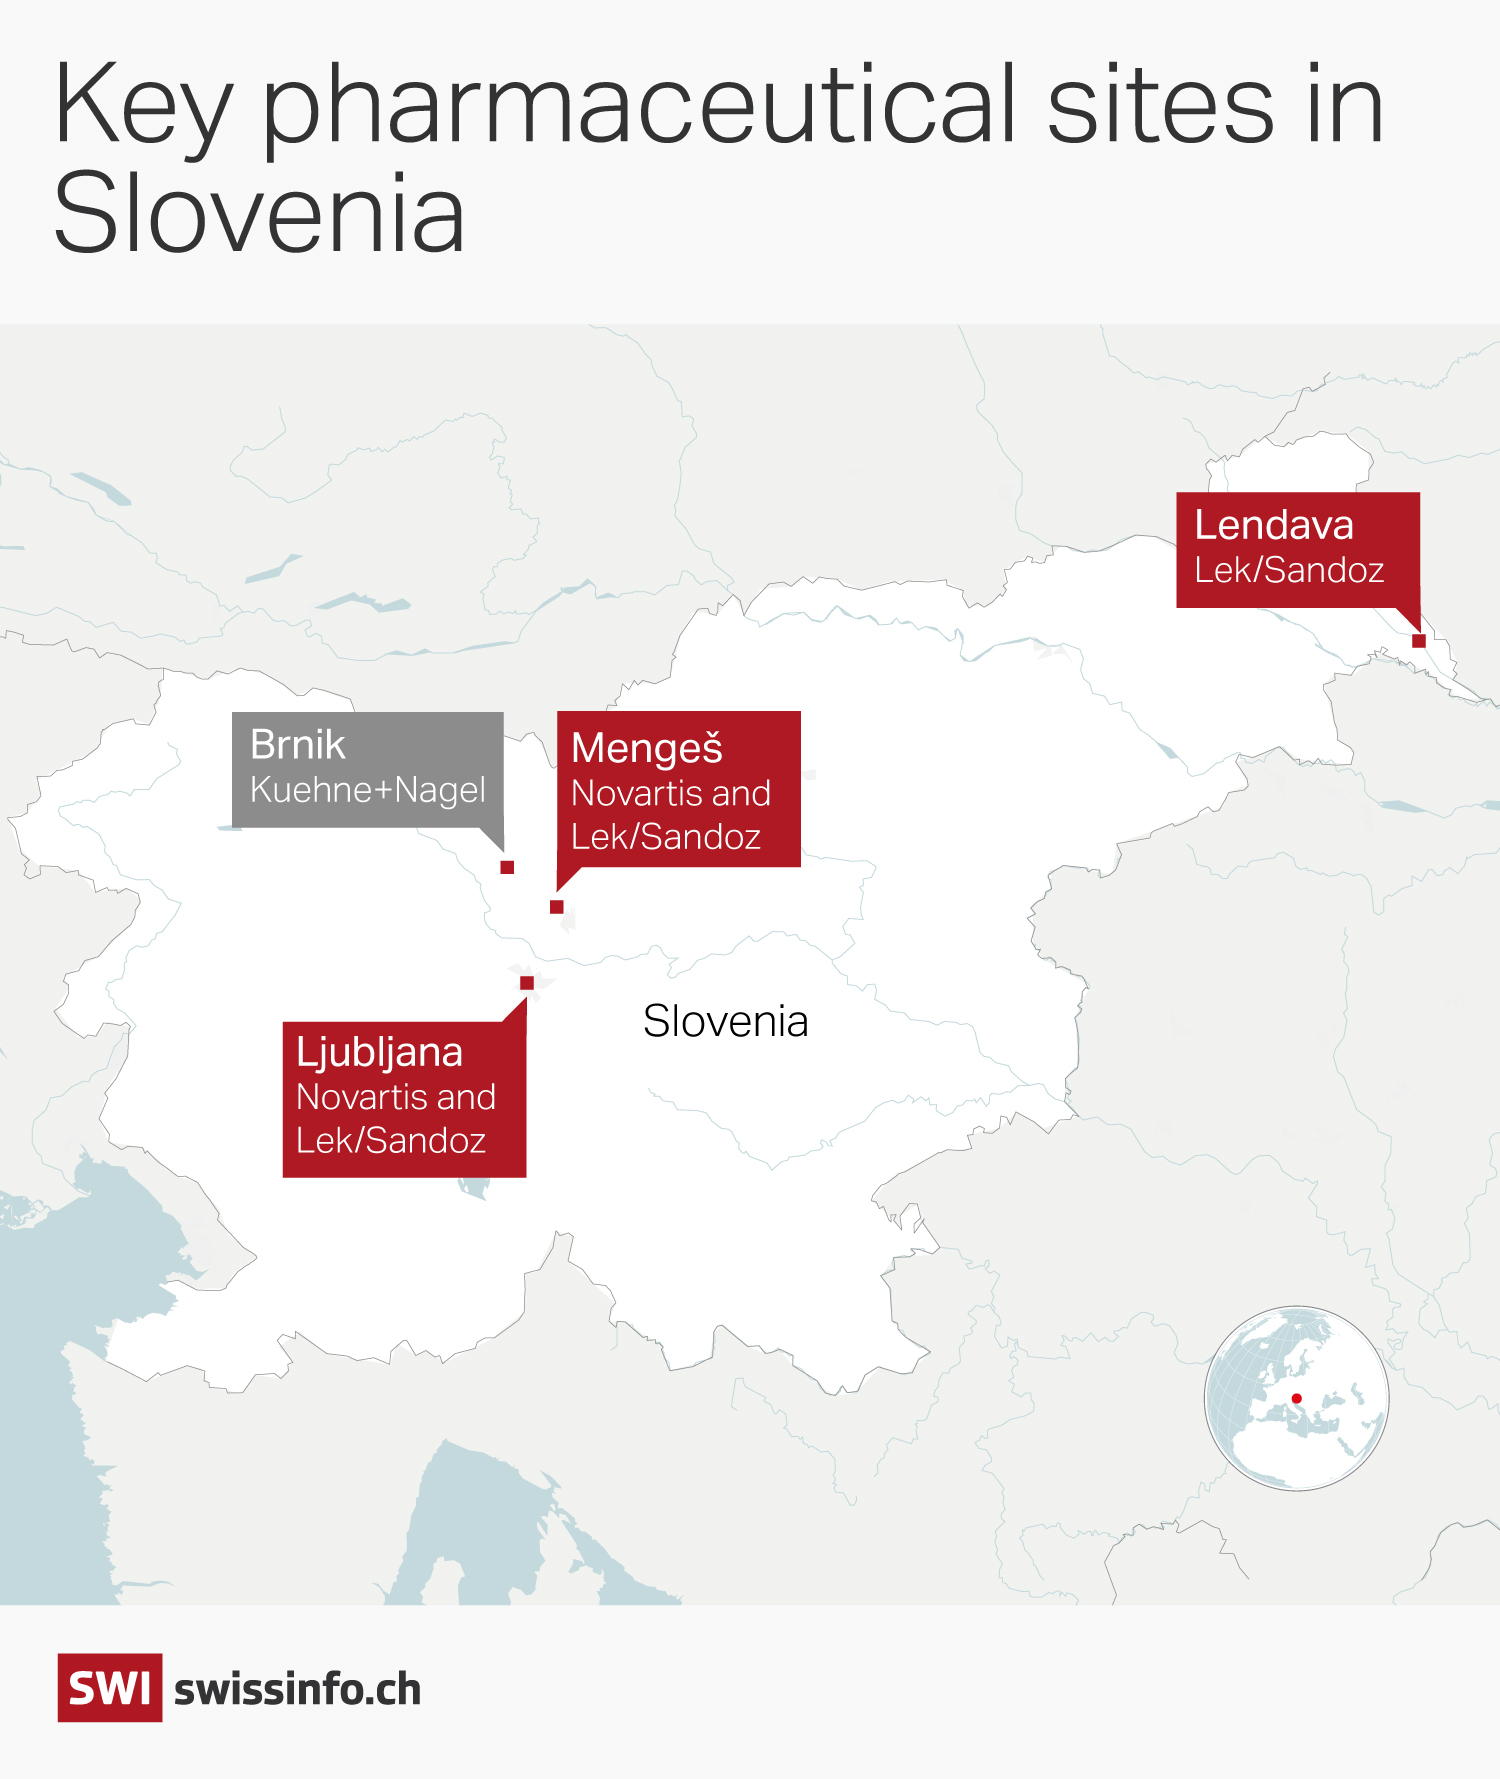 Map of Slovenia with pharmaceutical companies locations